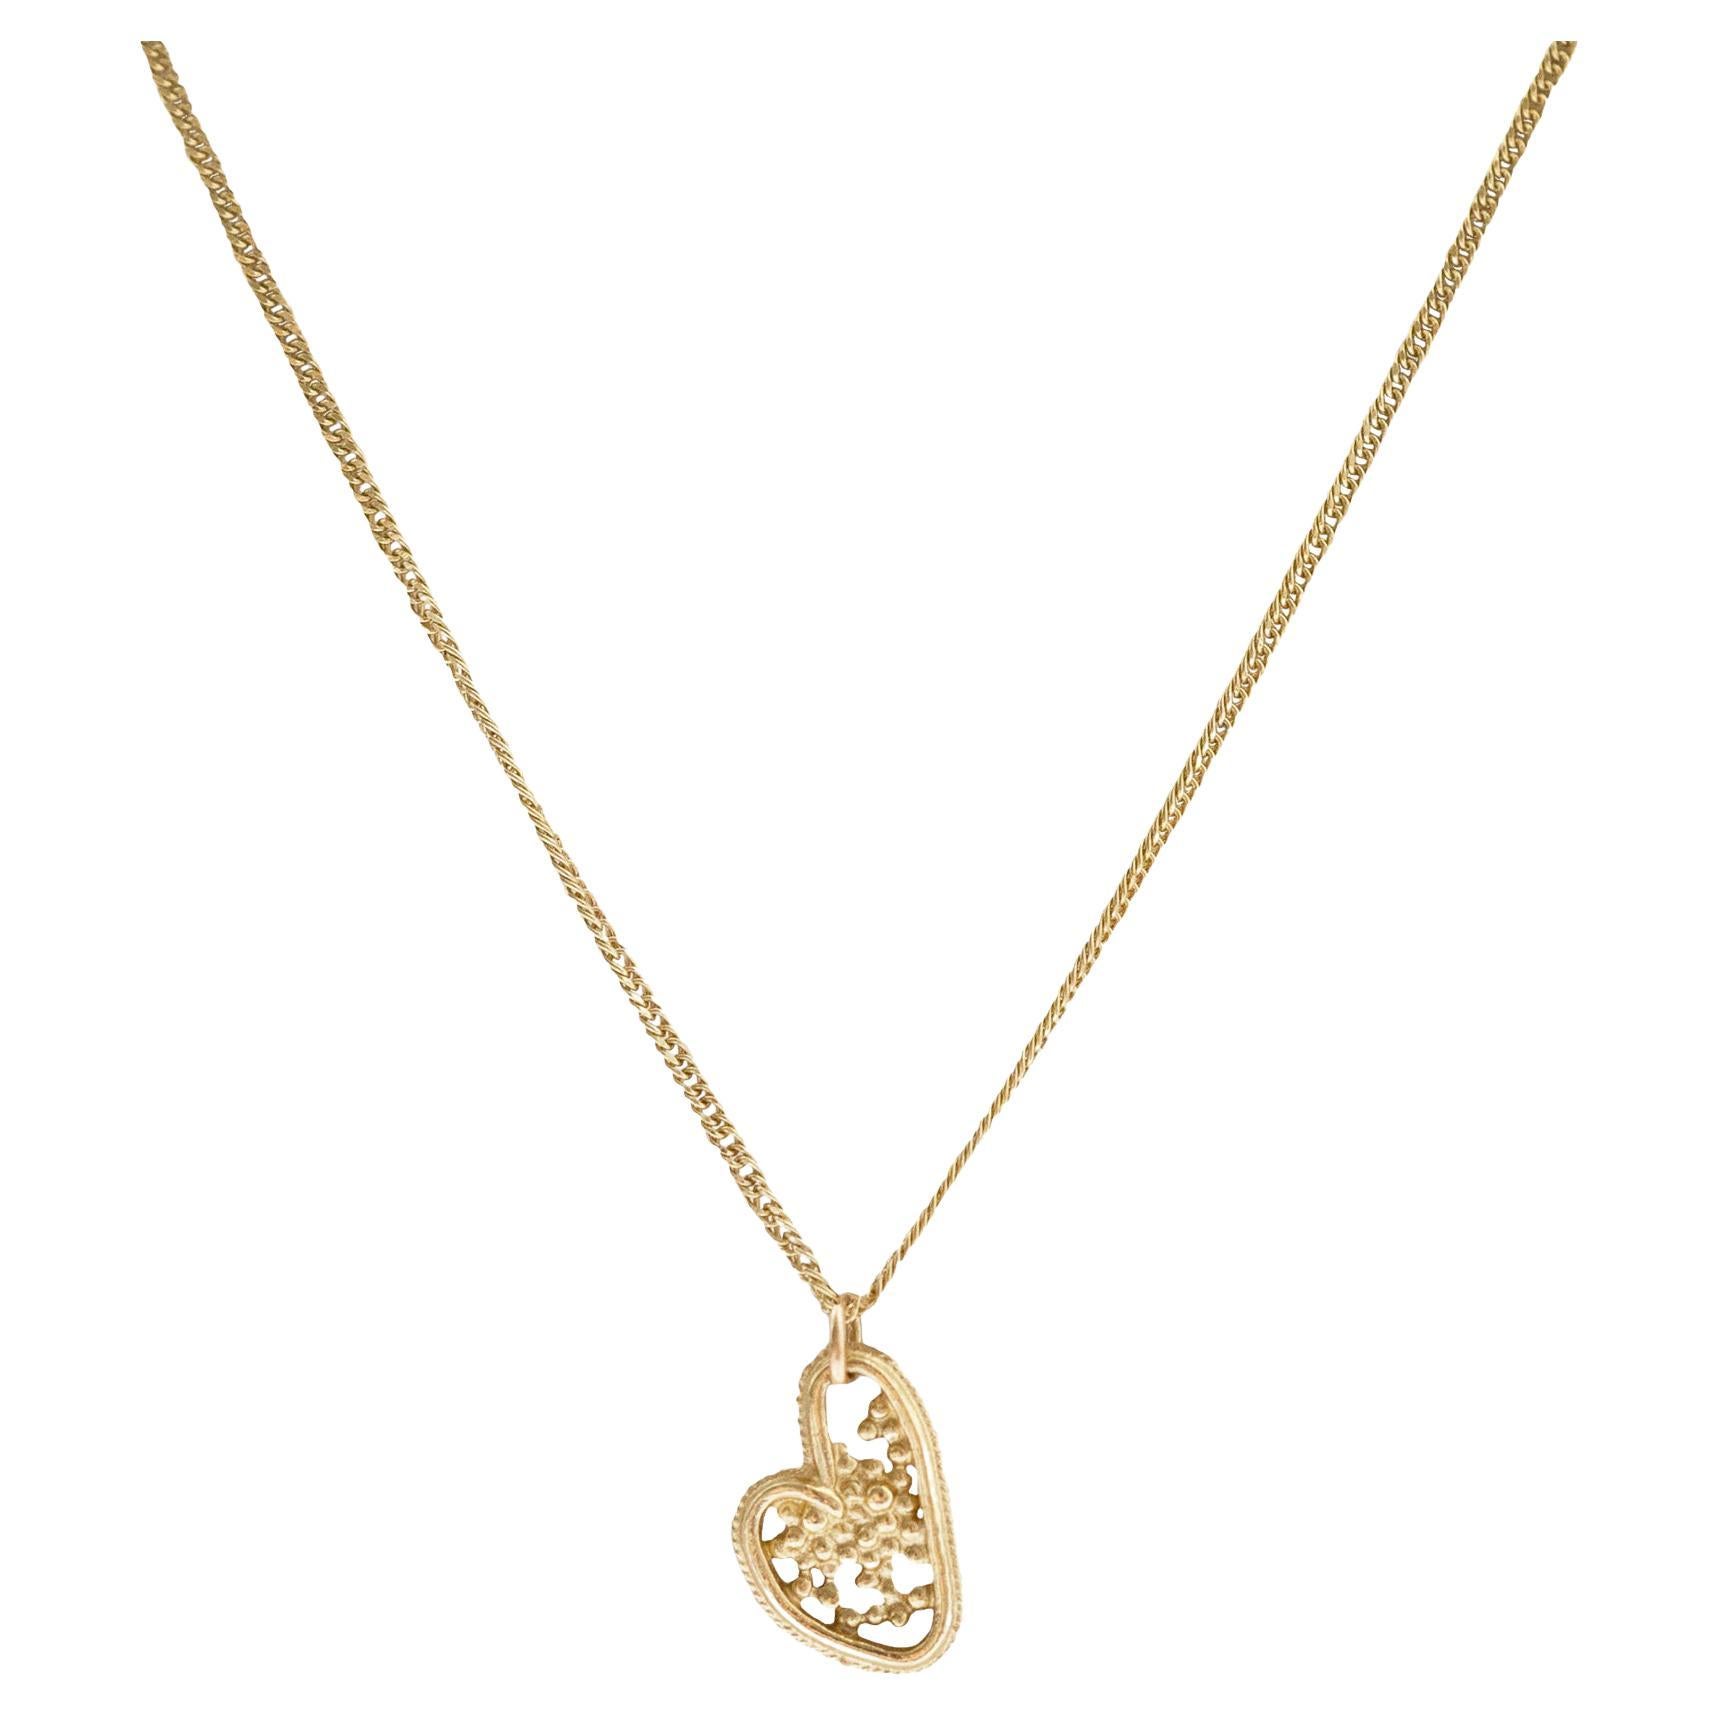 14 Karat Gold Heart Shaped Filigree Pendant Necklace by Mon Pilar 16 Inches